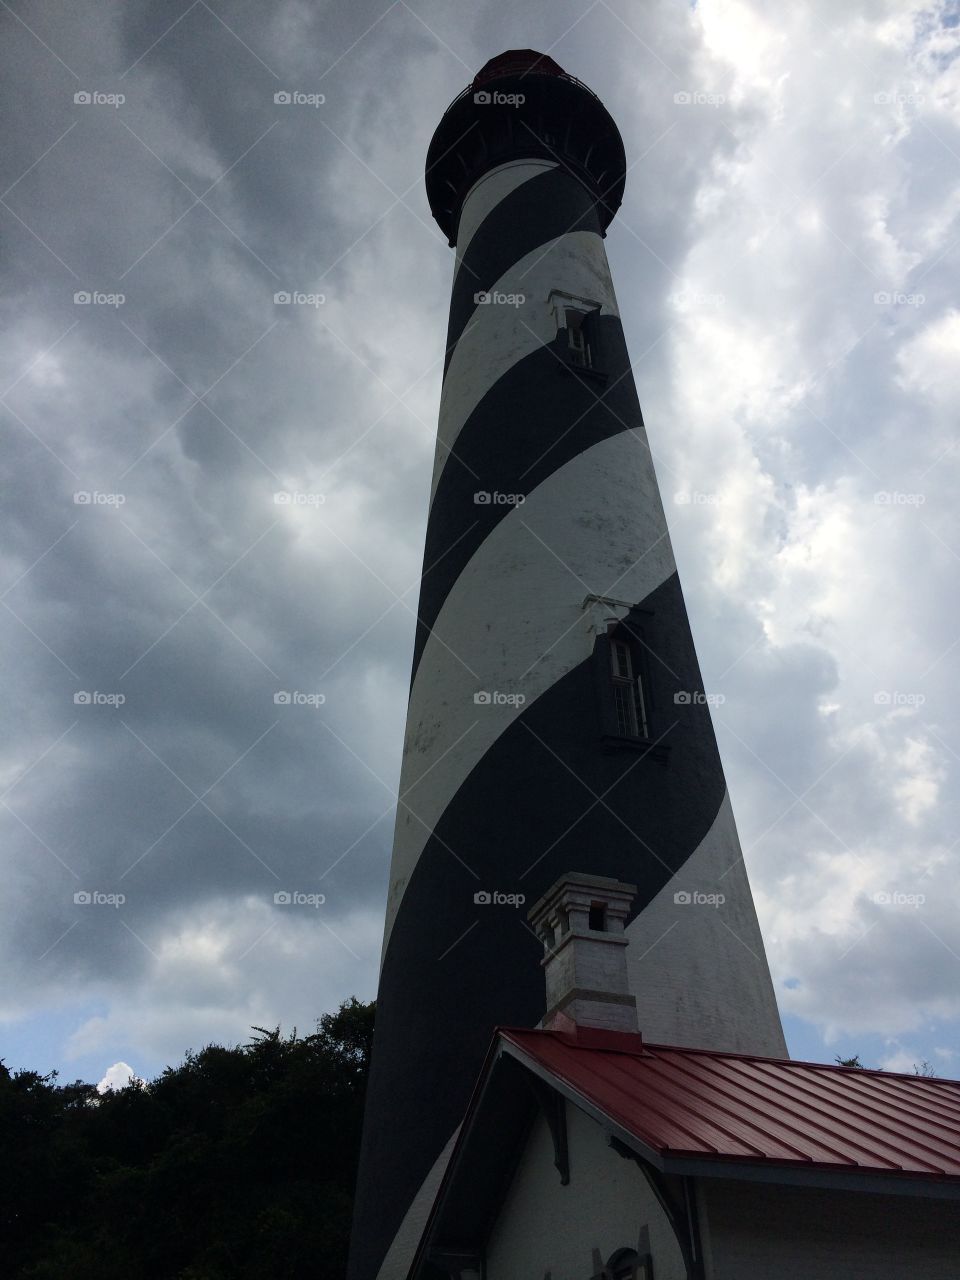 Gloomy skies darken the landscape surrounding the St. Augustine Lighthouse in Florida. 